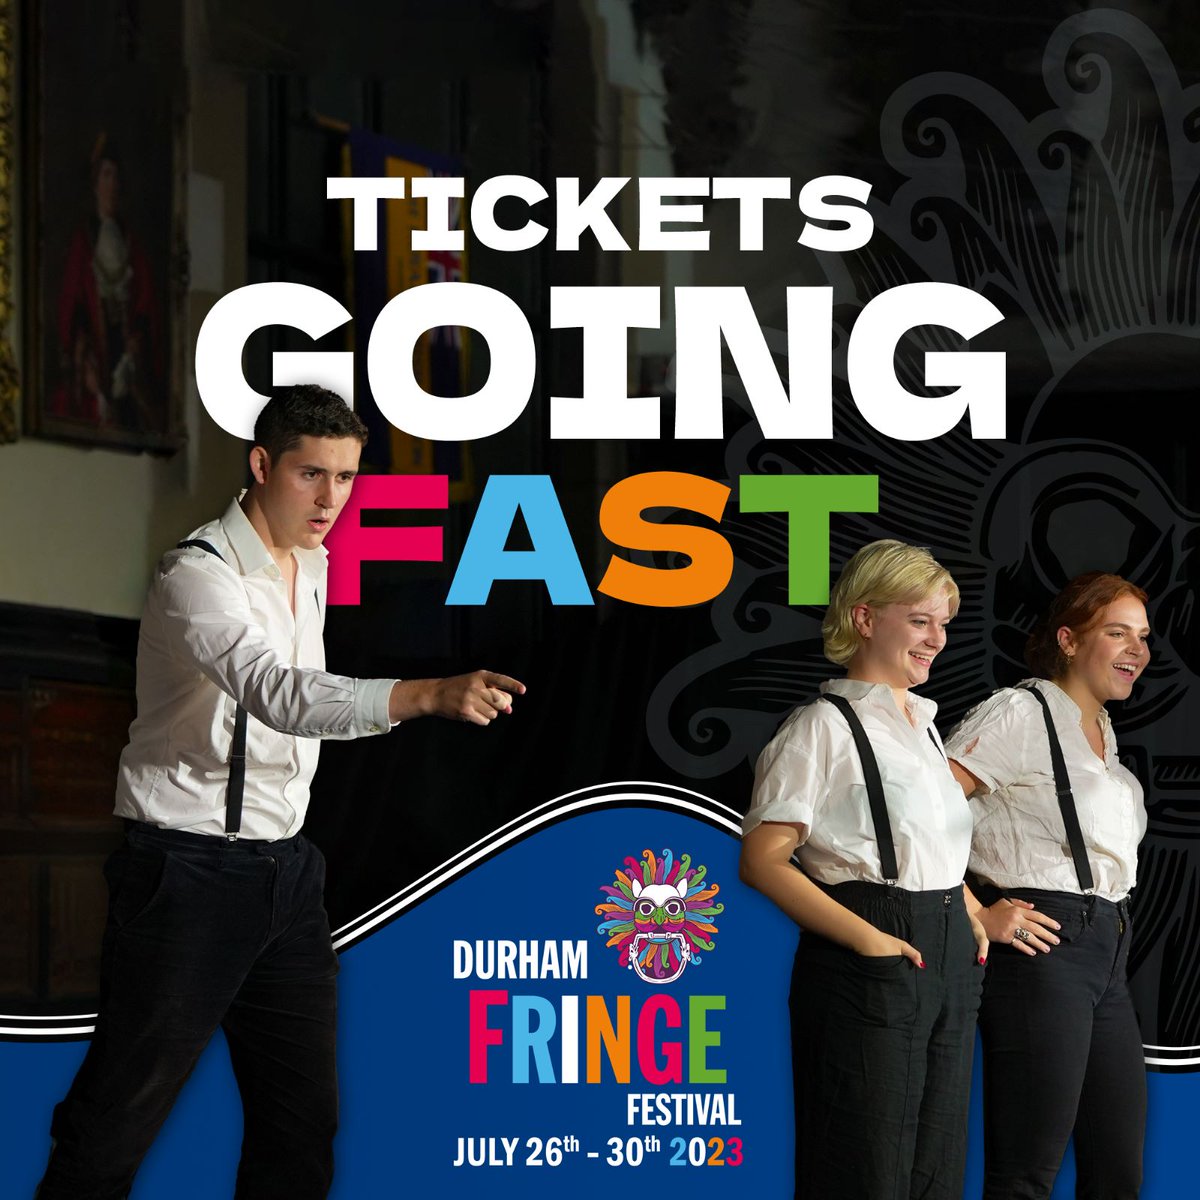 Tickets going fast for all our shows. Get yours now at durhamfringe.co.uk/events 
@culturecounty @durhamcountynews @thisisdurham @visitcountydurham @durhambid @FringeAtTheCity
#lovedurham  #durhamfringe #durhamfringefest  #durhamculturecounty #durhamshakespearefestival #dsf2023